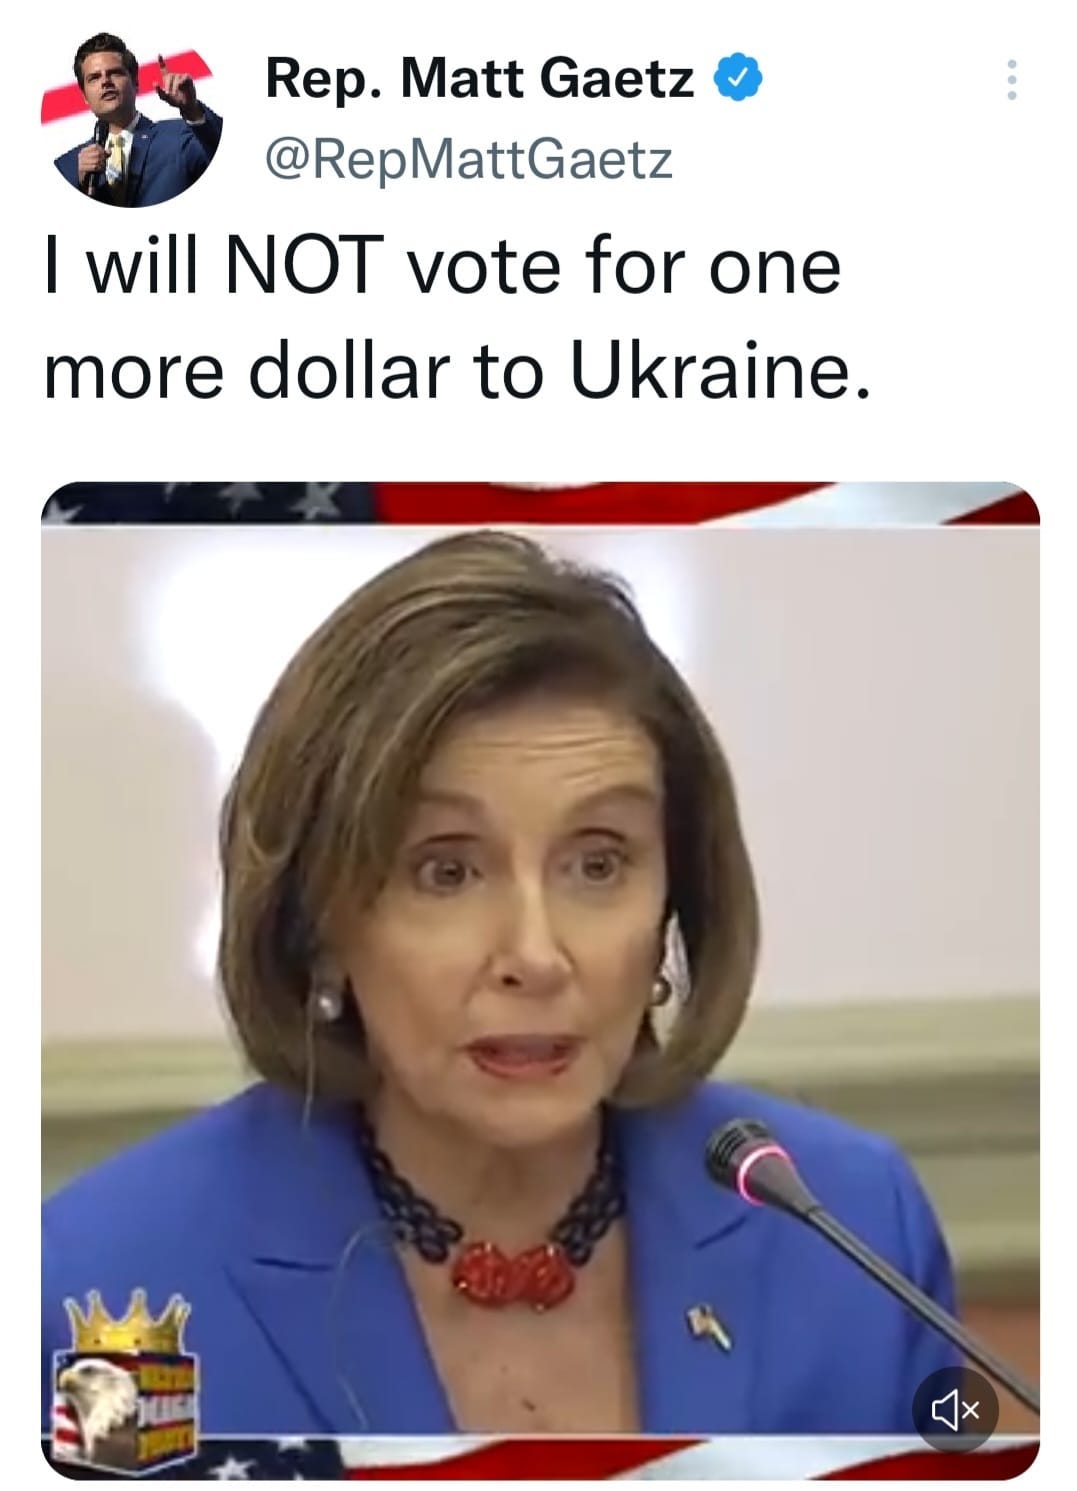 May be an image of 2 people and text that says 'Rep. Matt Gaetz @RepMattGaetz I will NOT vote for one more dollar to Ukraine.'